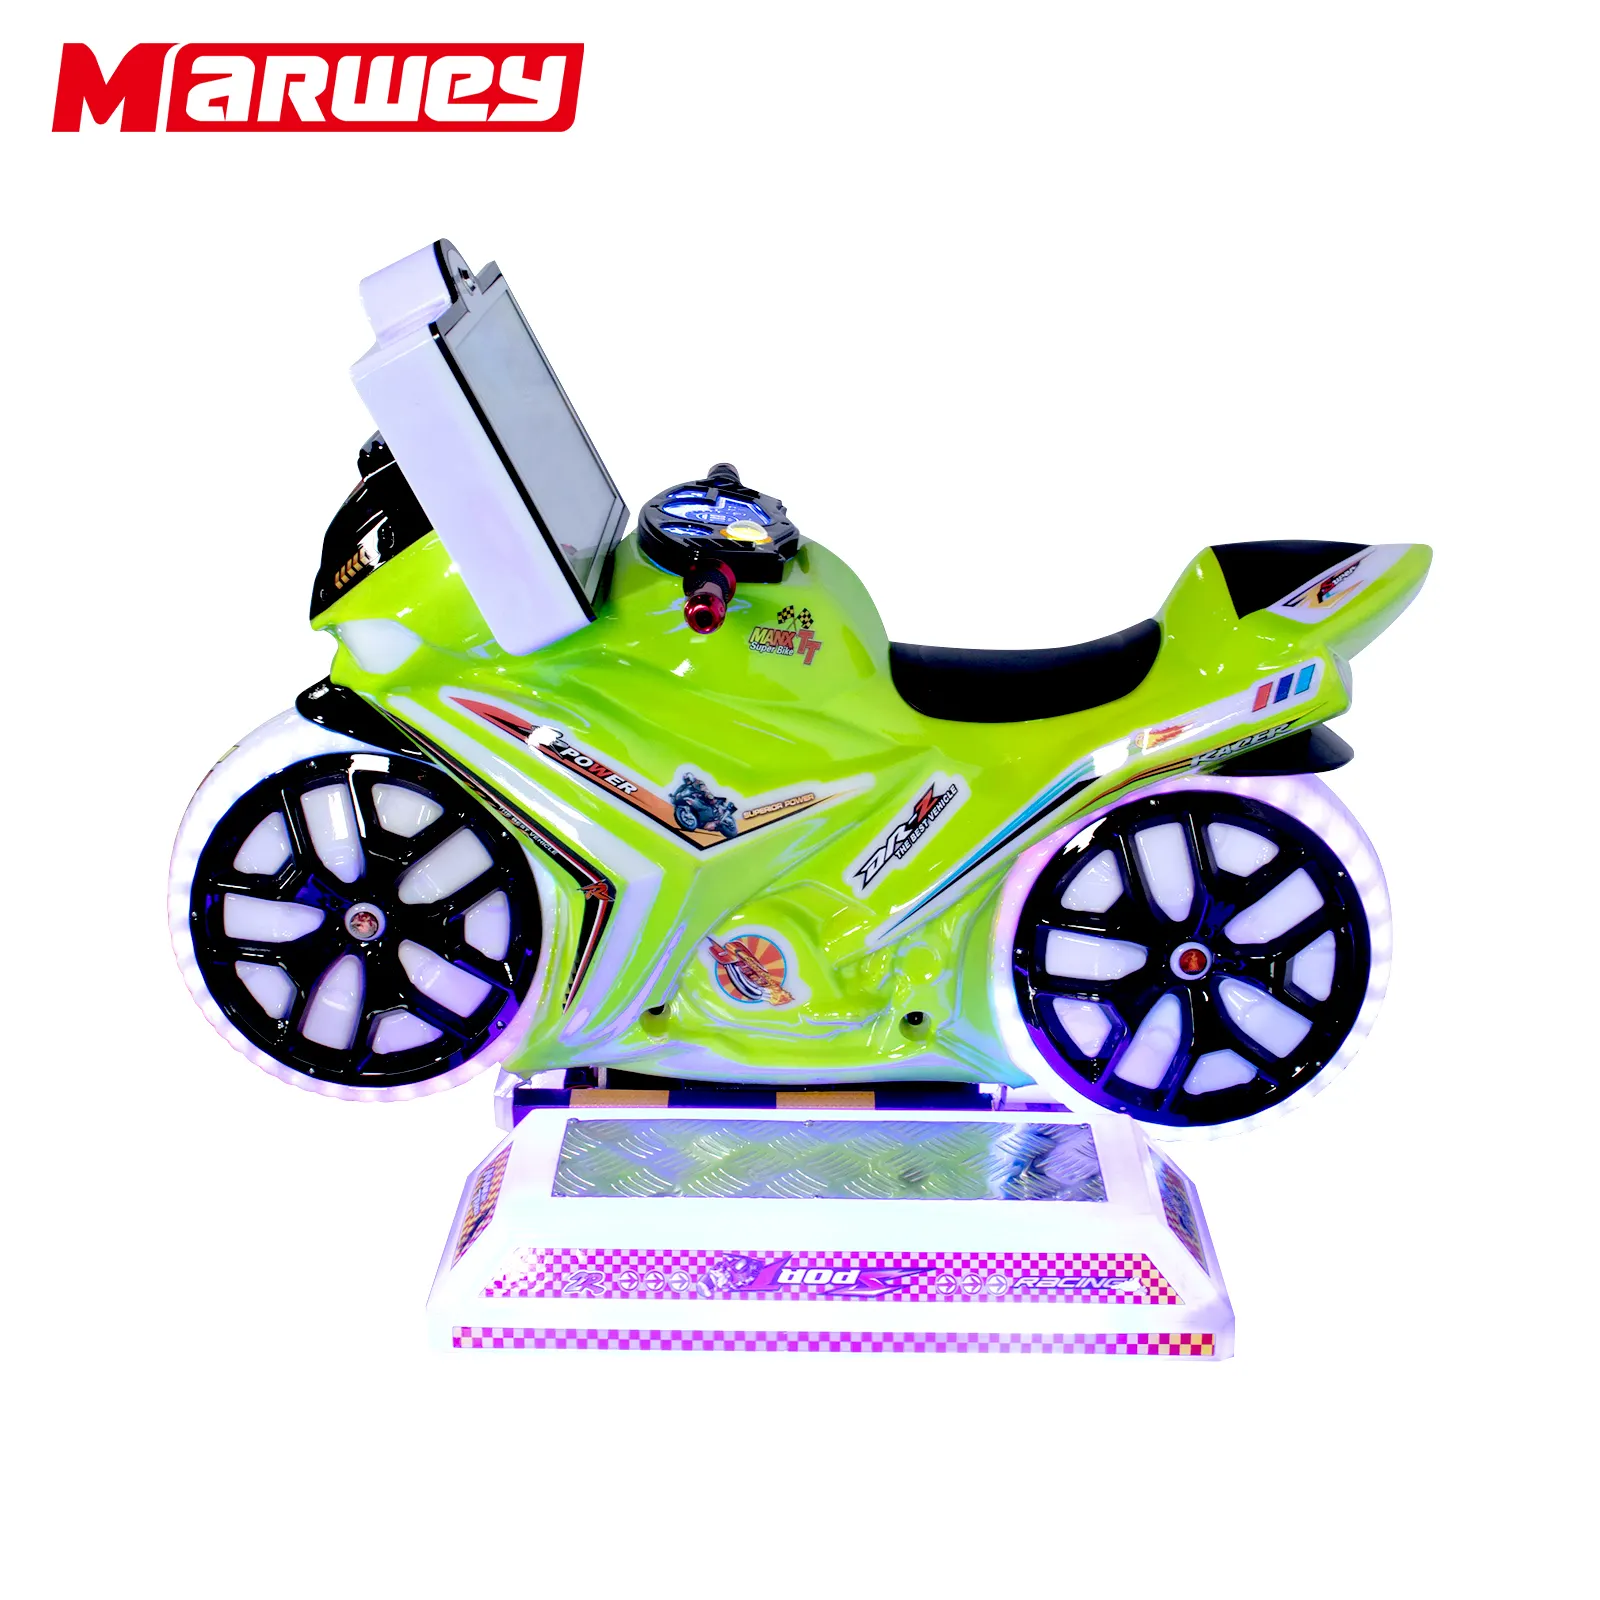 Indoor Children Electric Video Simulator Motorcycle Swing Games Coin-operated Arcade Motorcycle Racing Game